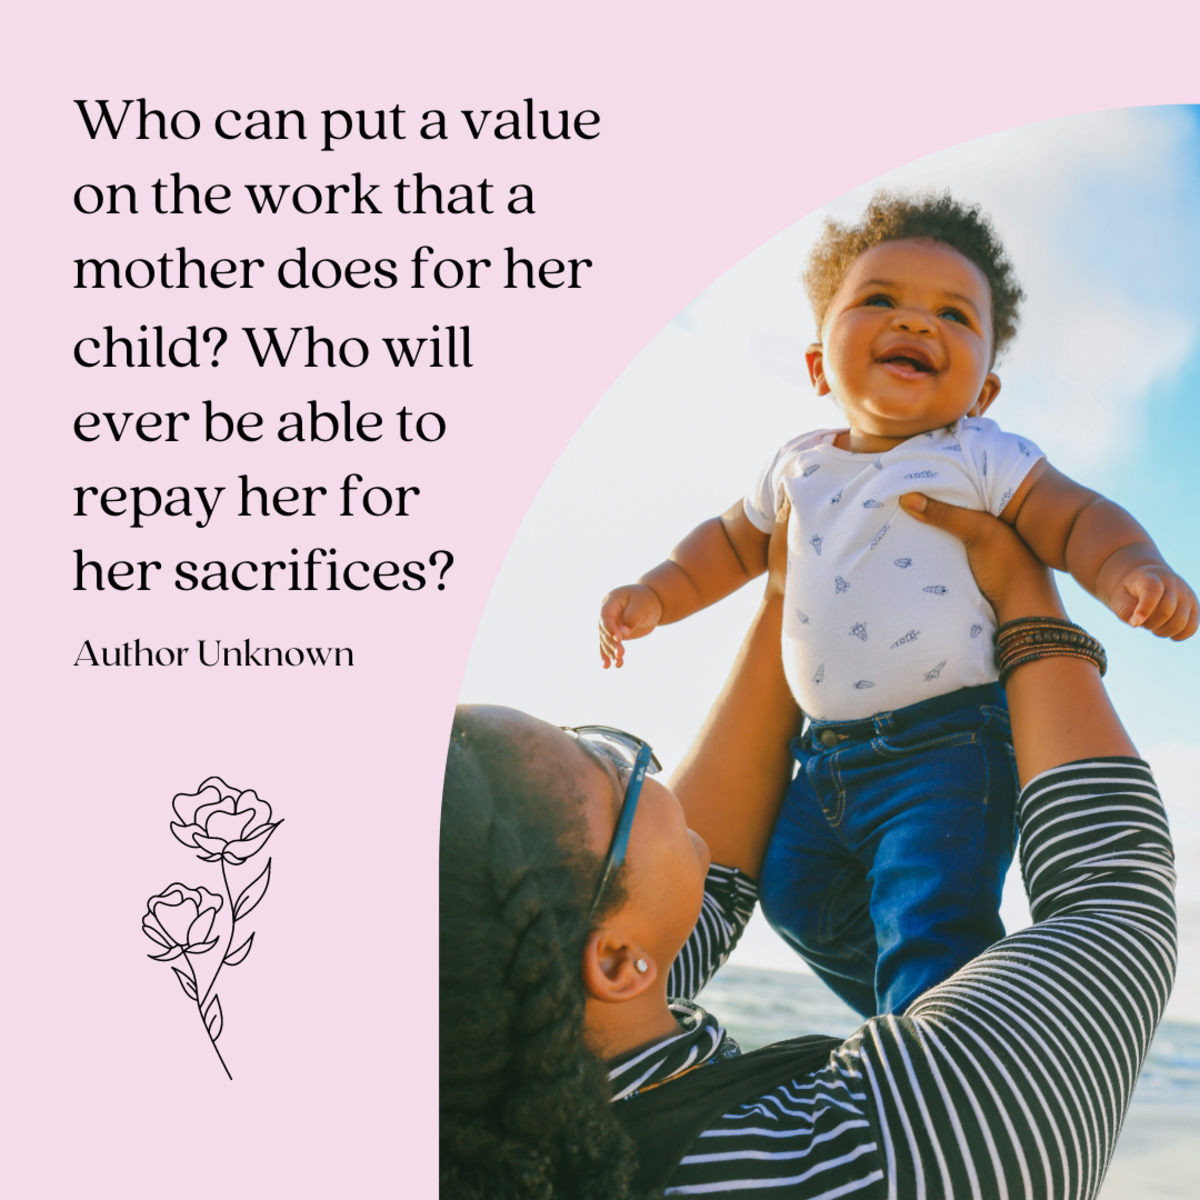 "Who can put a value on the work that a mother does for her child? Who can ever be able to repay her for her sacrifices?"